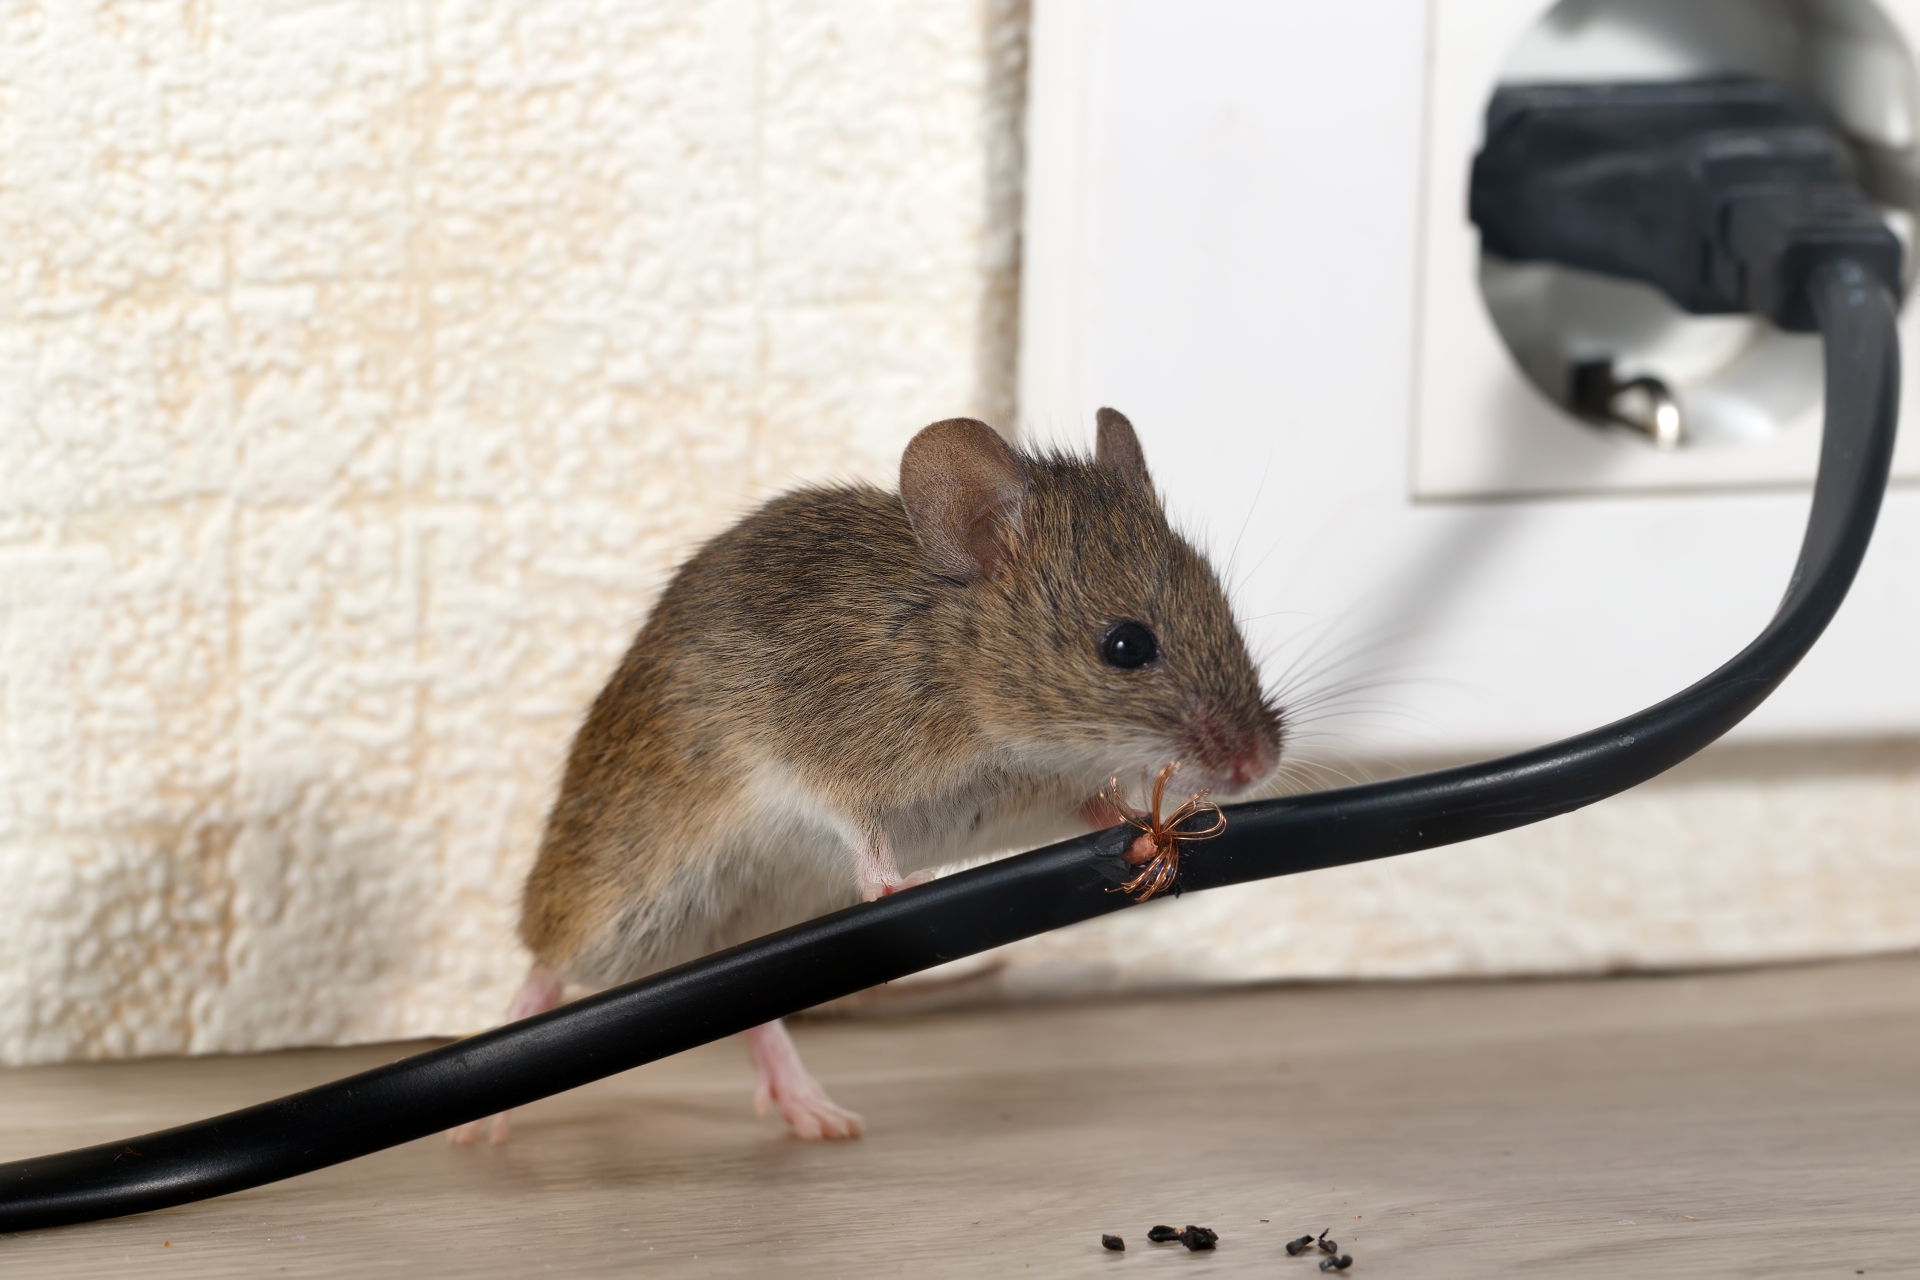 Mice Infestation, Pest Control in Barkingside, Hainault, IG6. Call Now 020 8166 9746